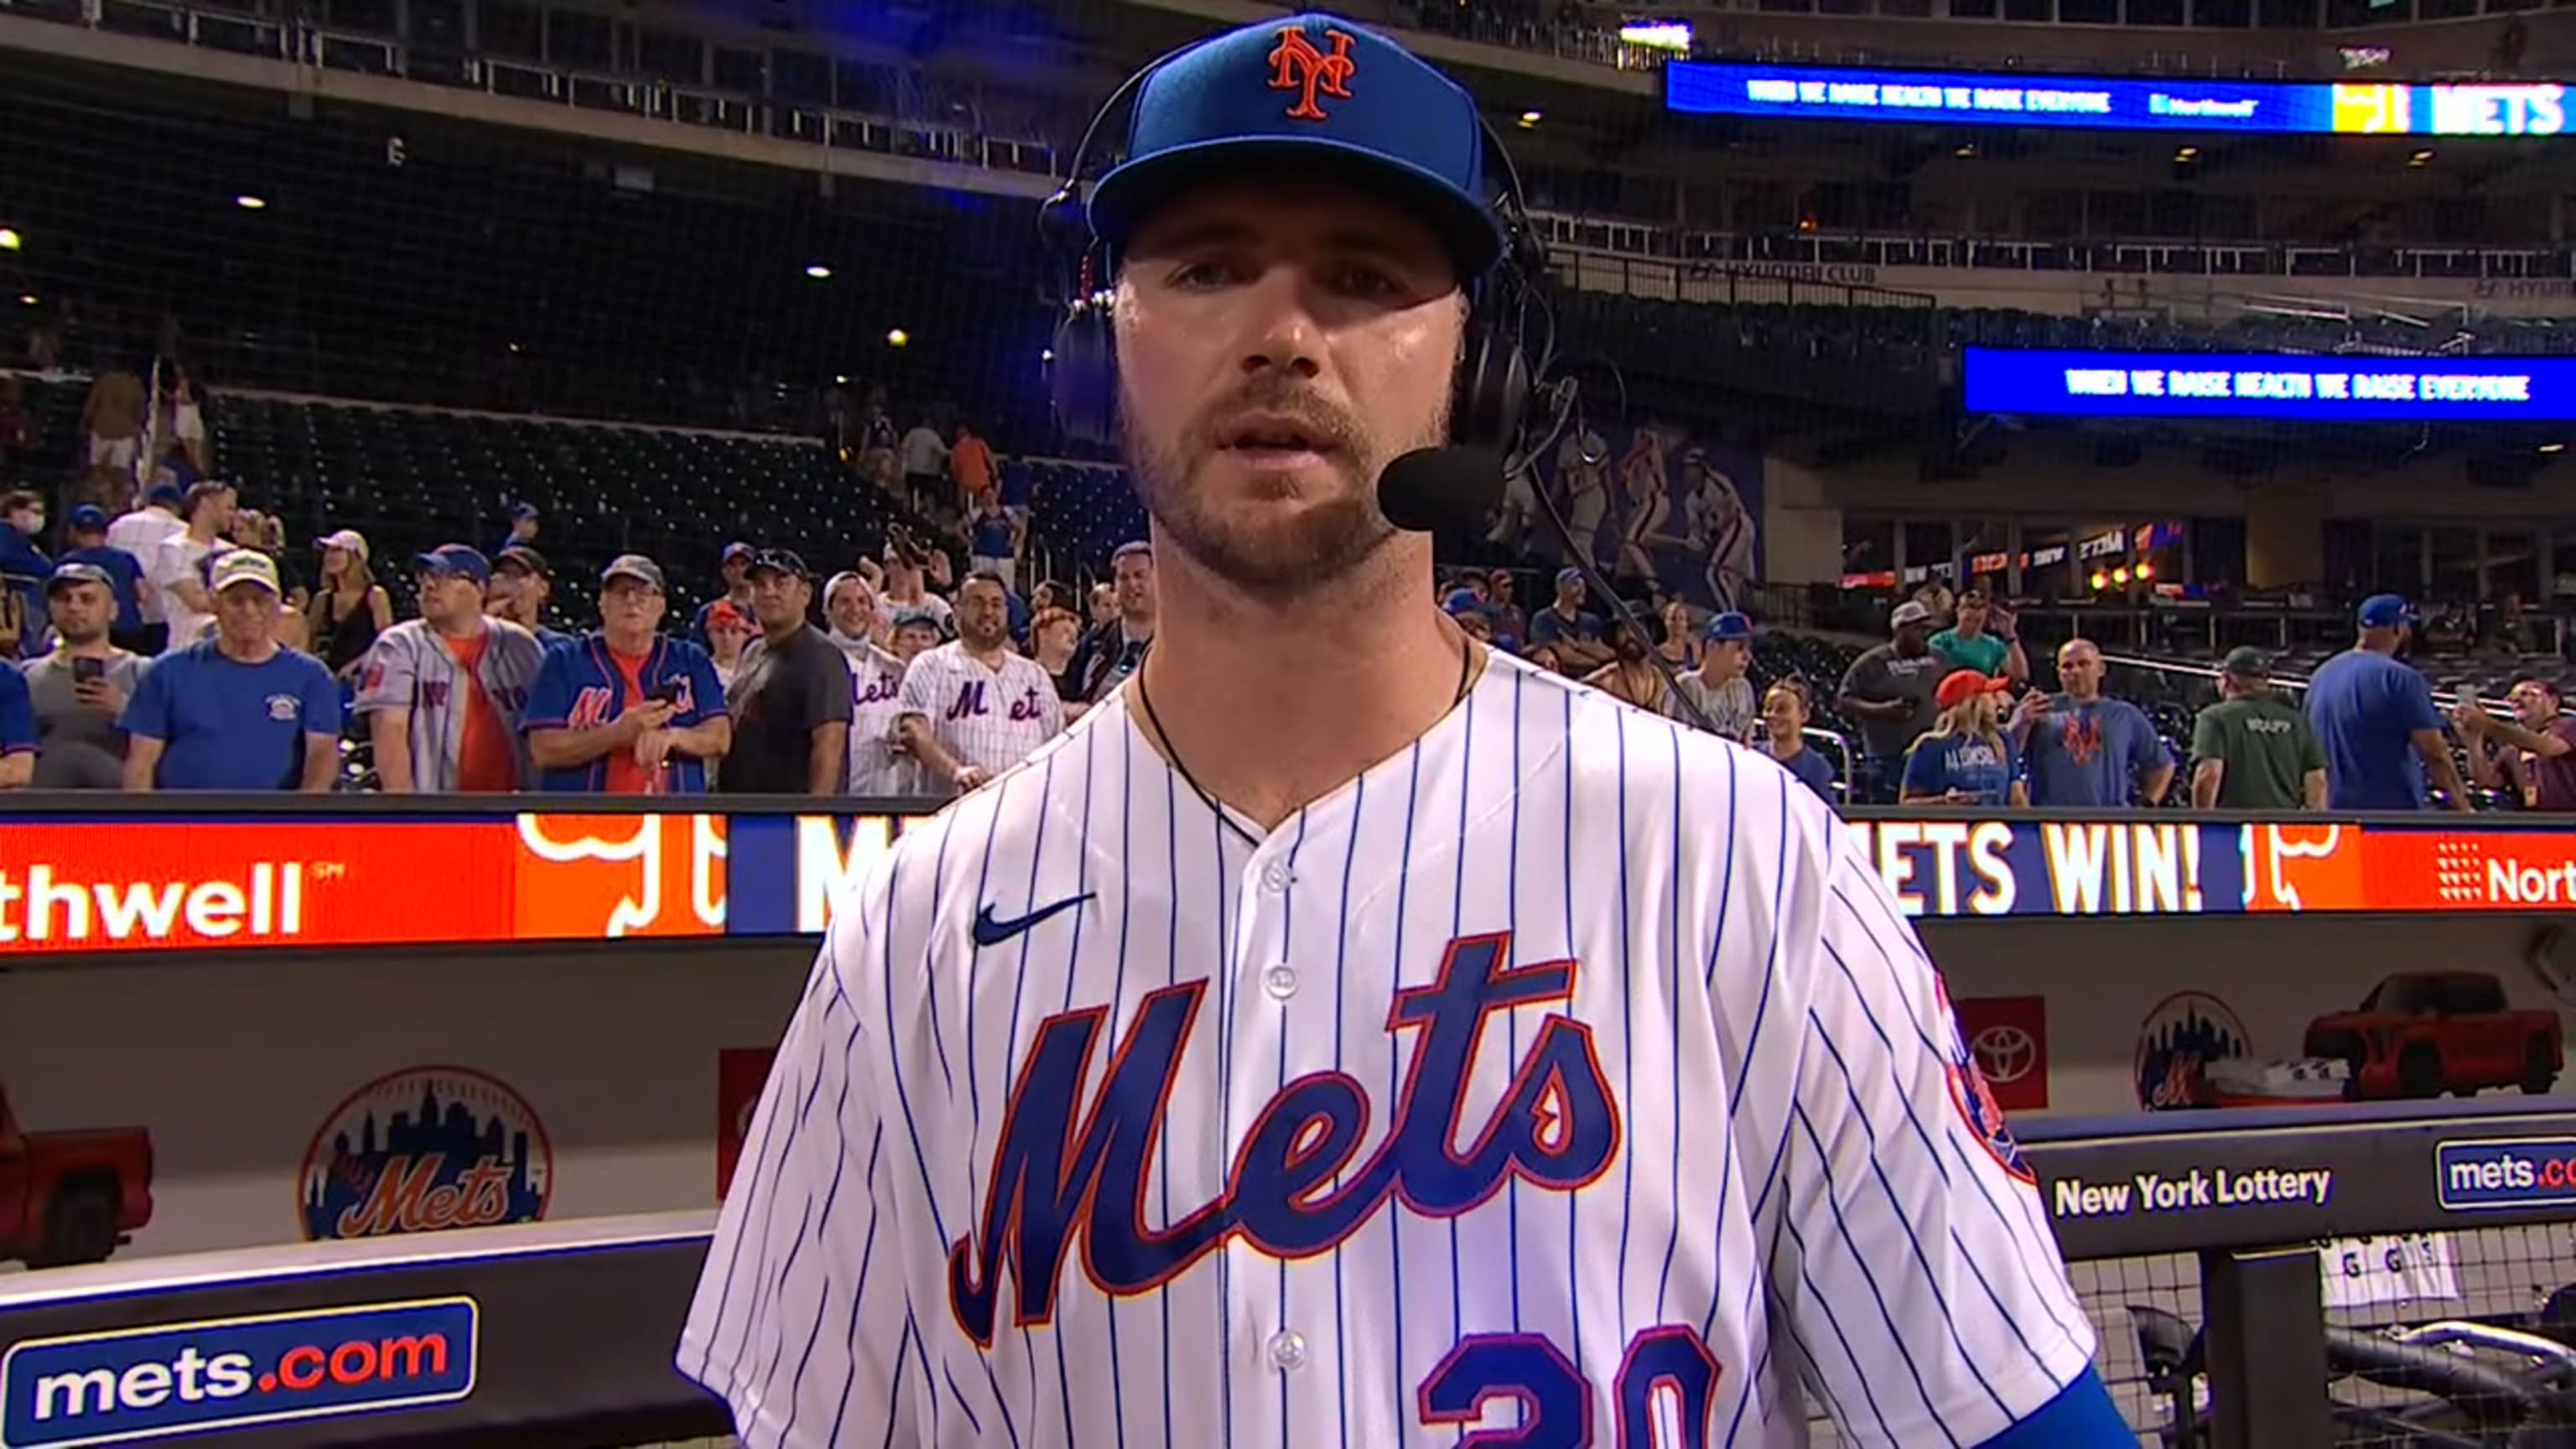 Mets vs Rays Highlights: Pete Alonso homers again as Mets notch